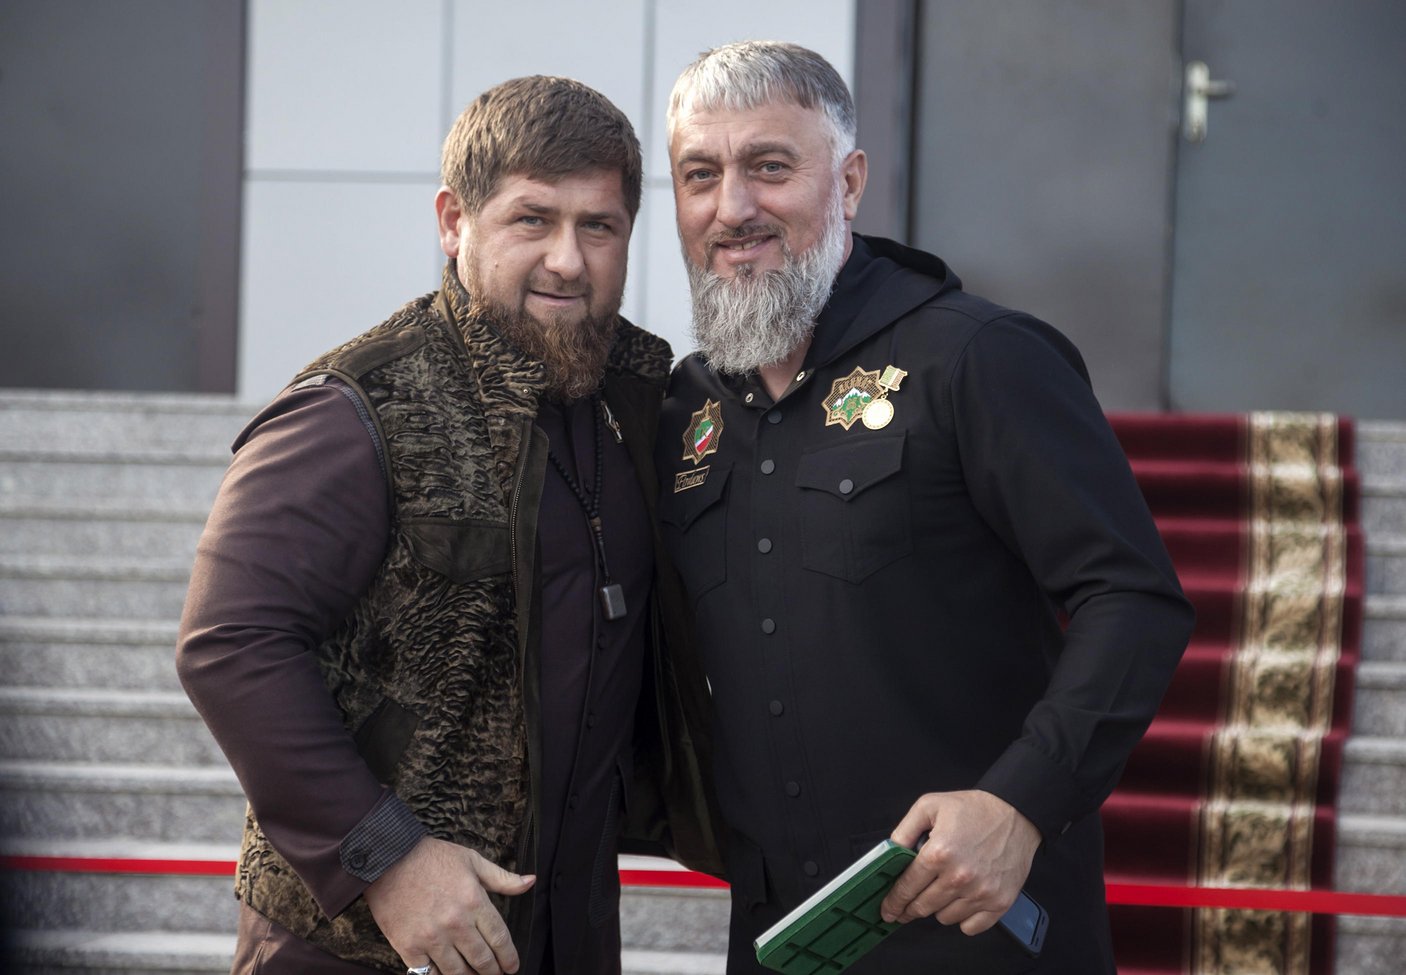 How an emissary of a prominent chechen leader resolved russian business disputes, leaving with millions